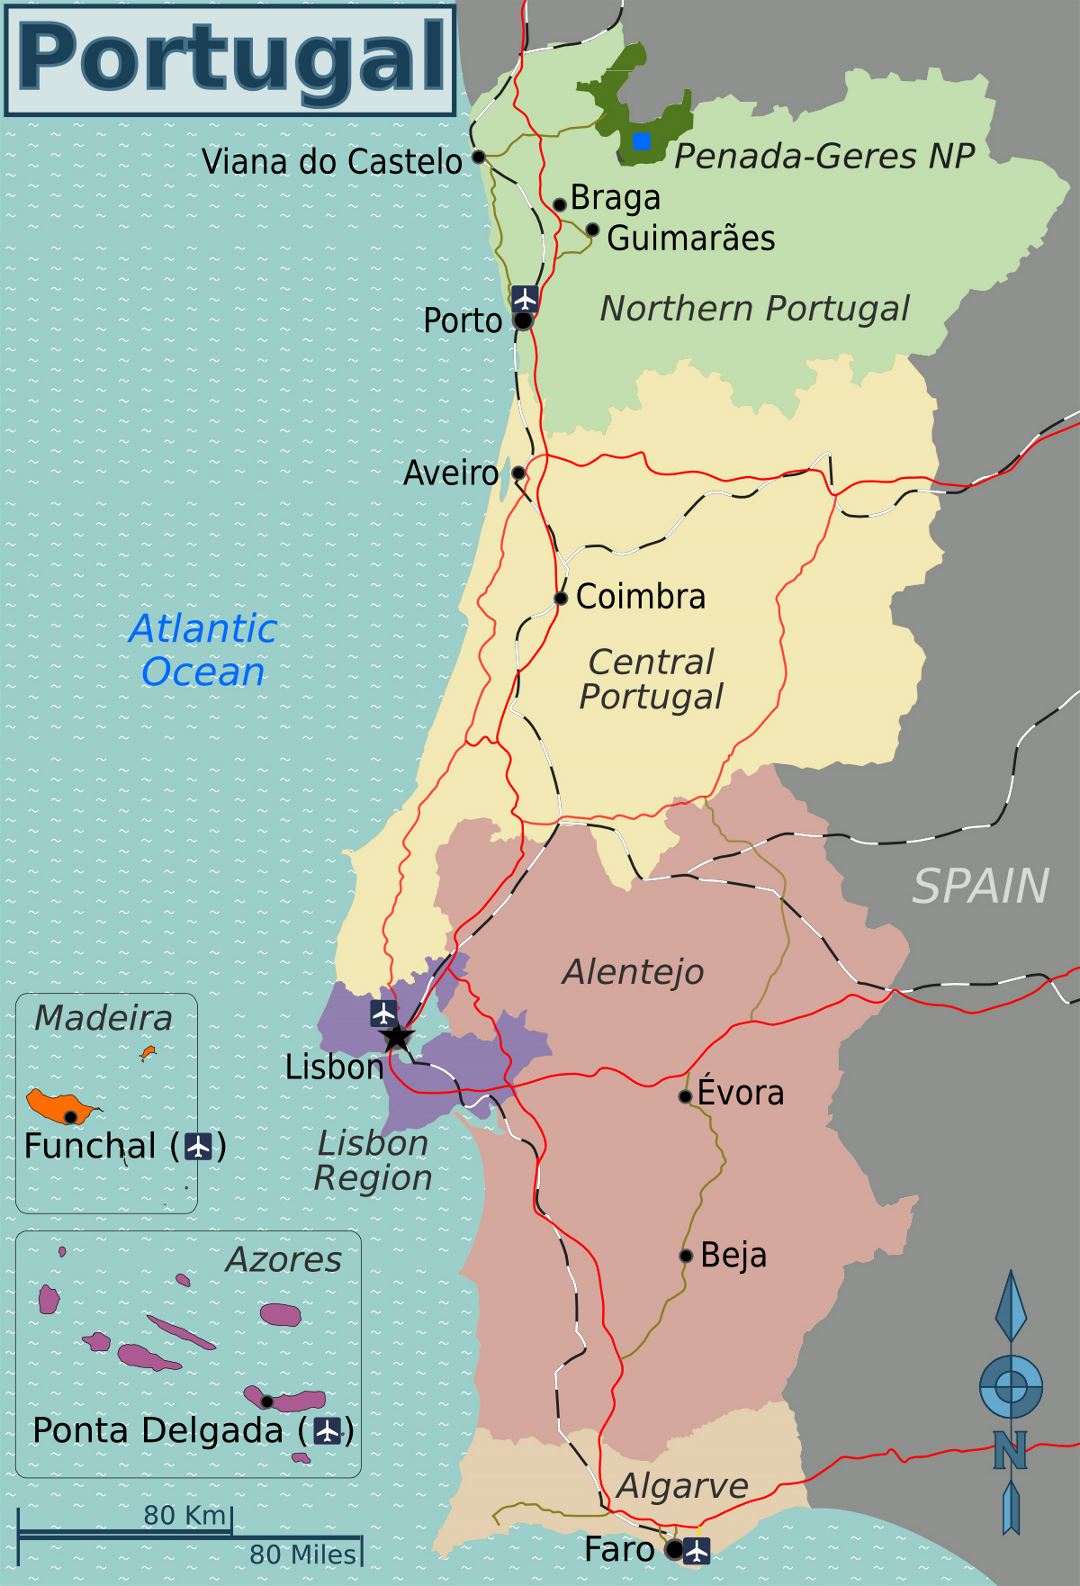 Large regions map of Portugal